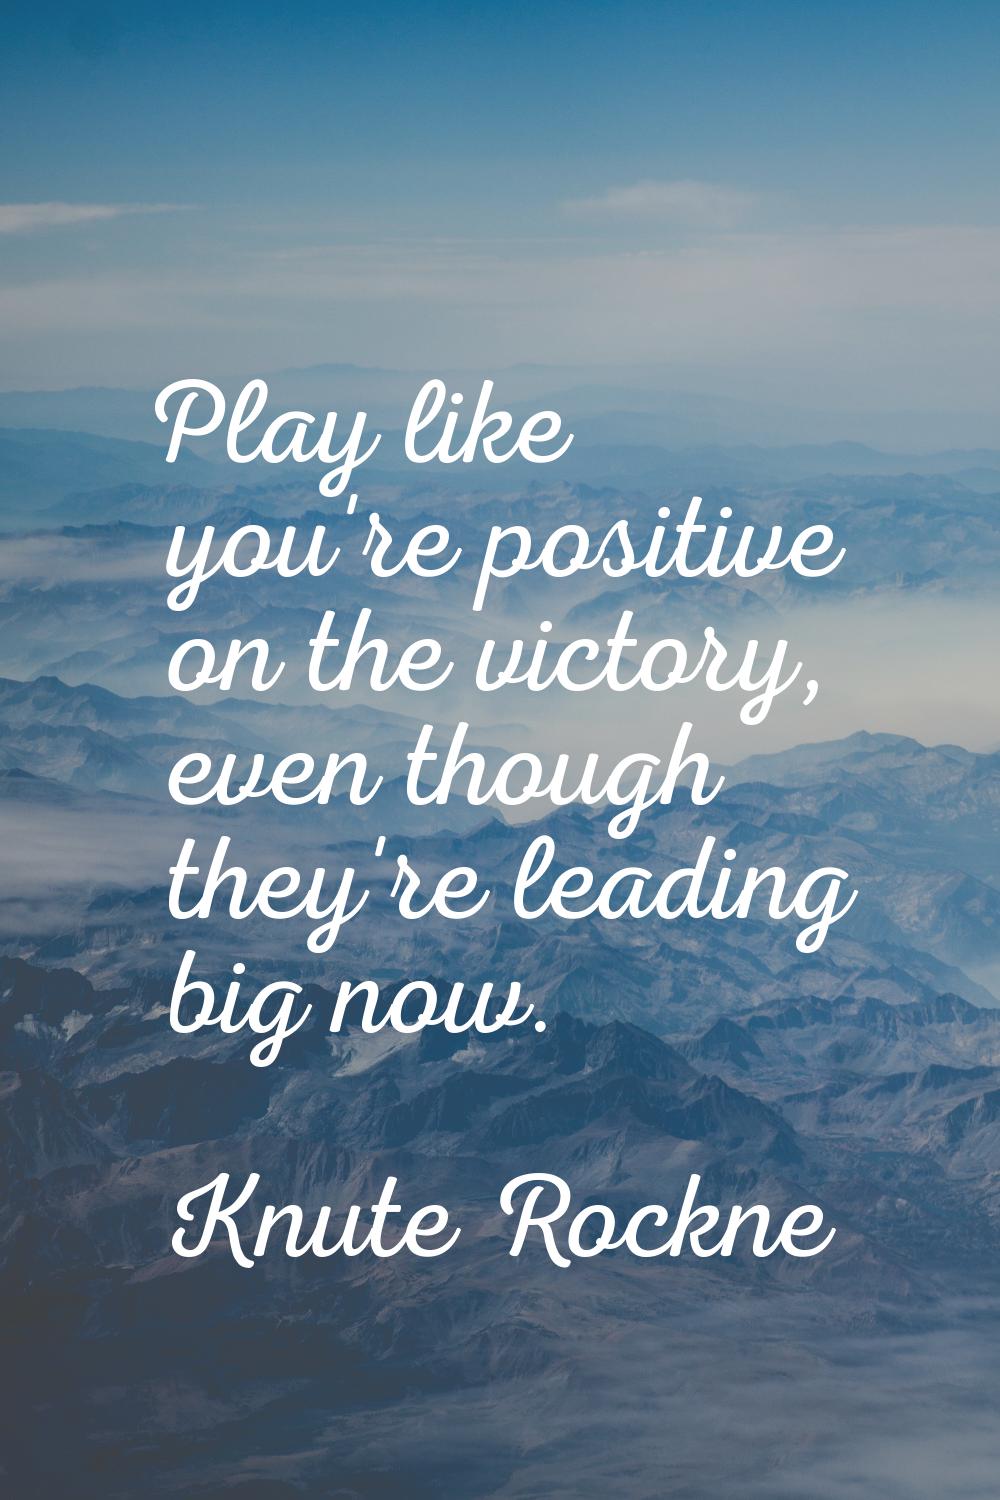 Play like you're positive on the victory, even though they're leading big now.